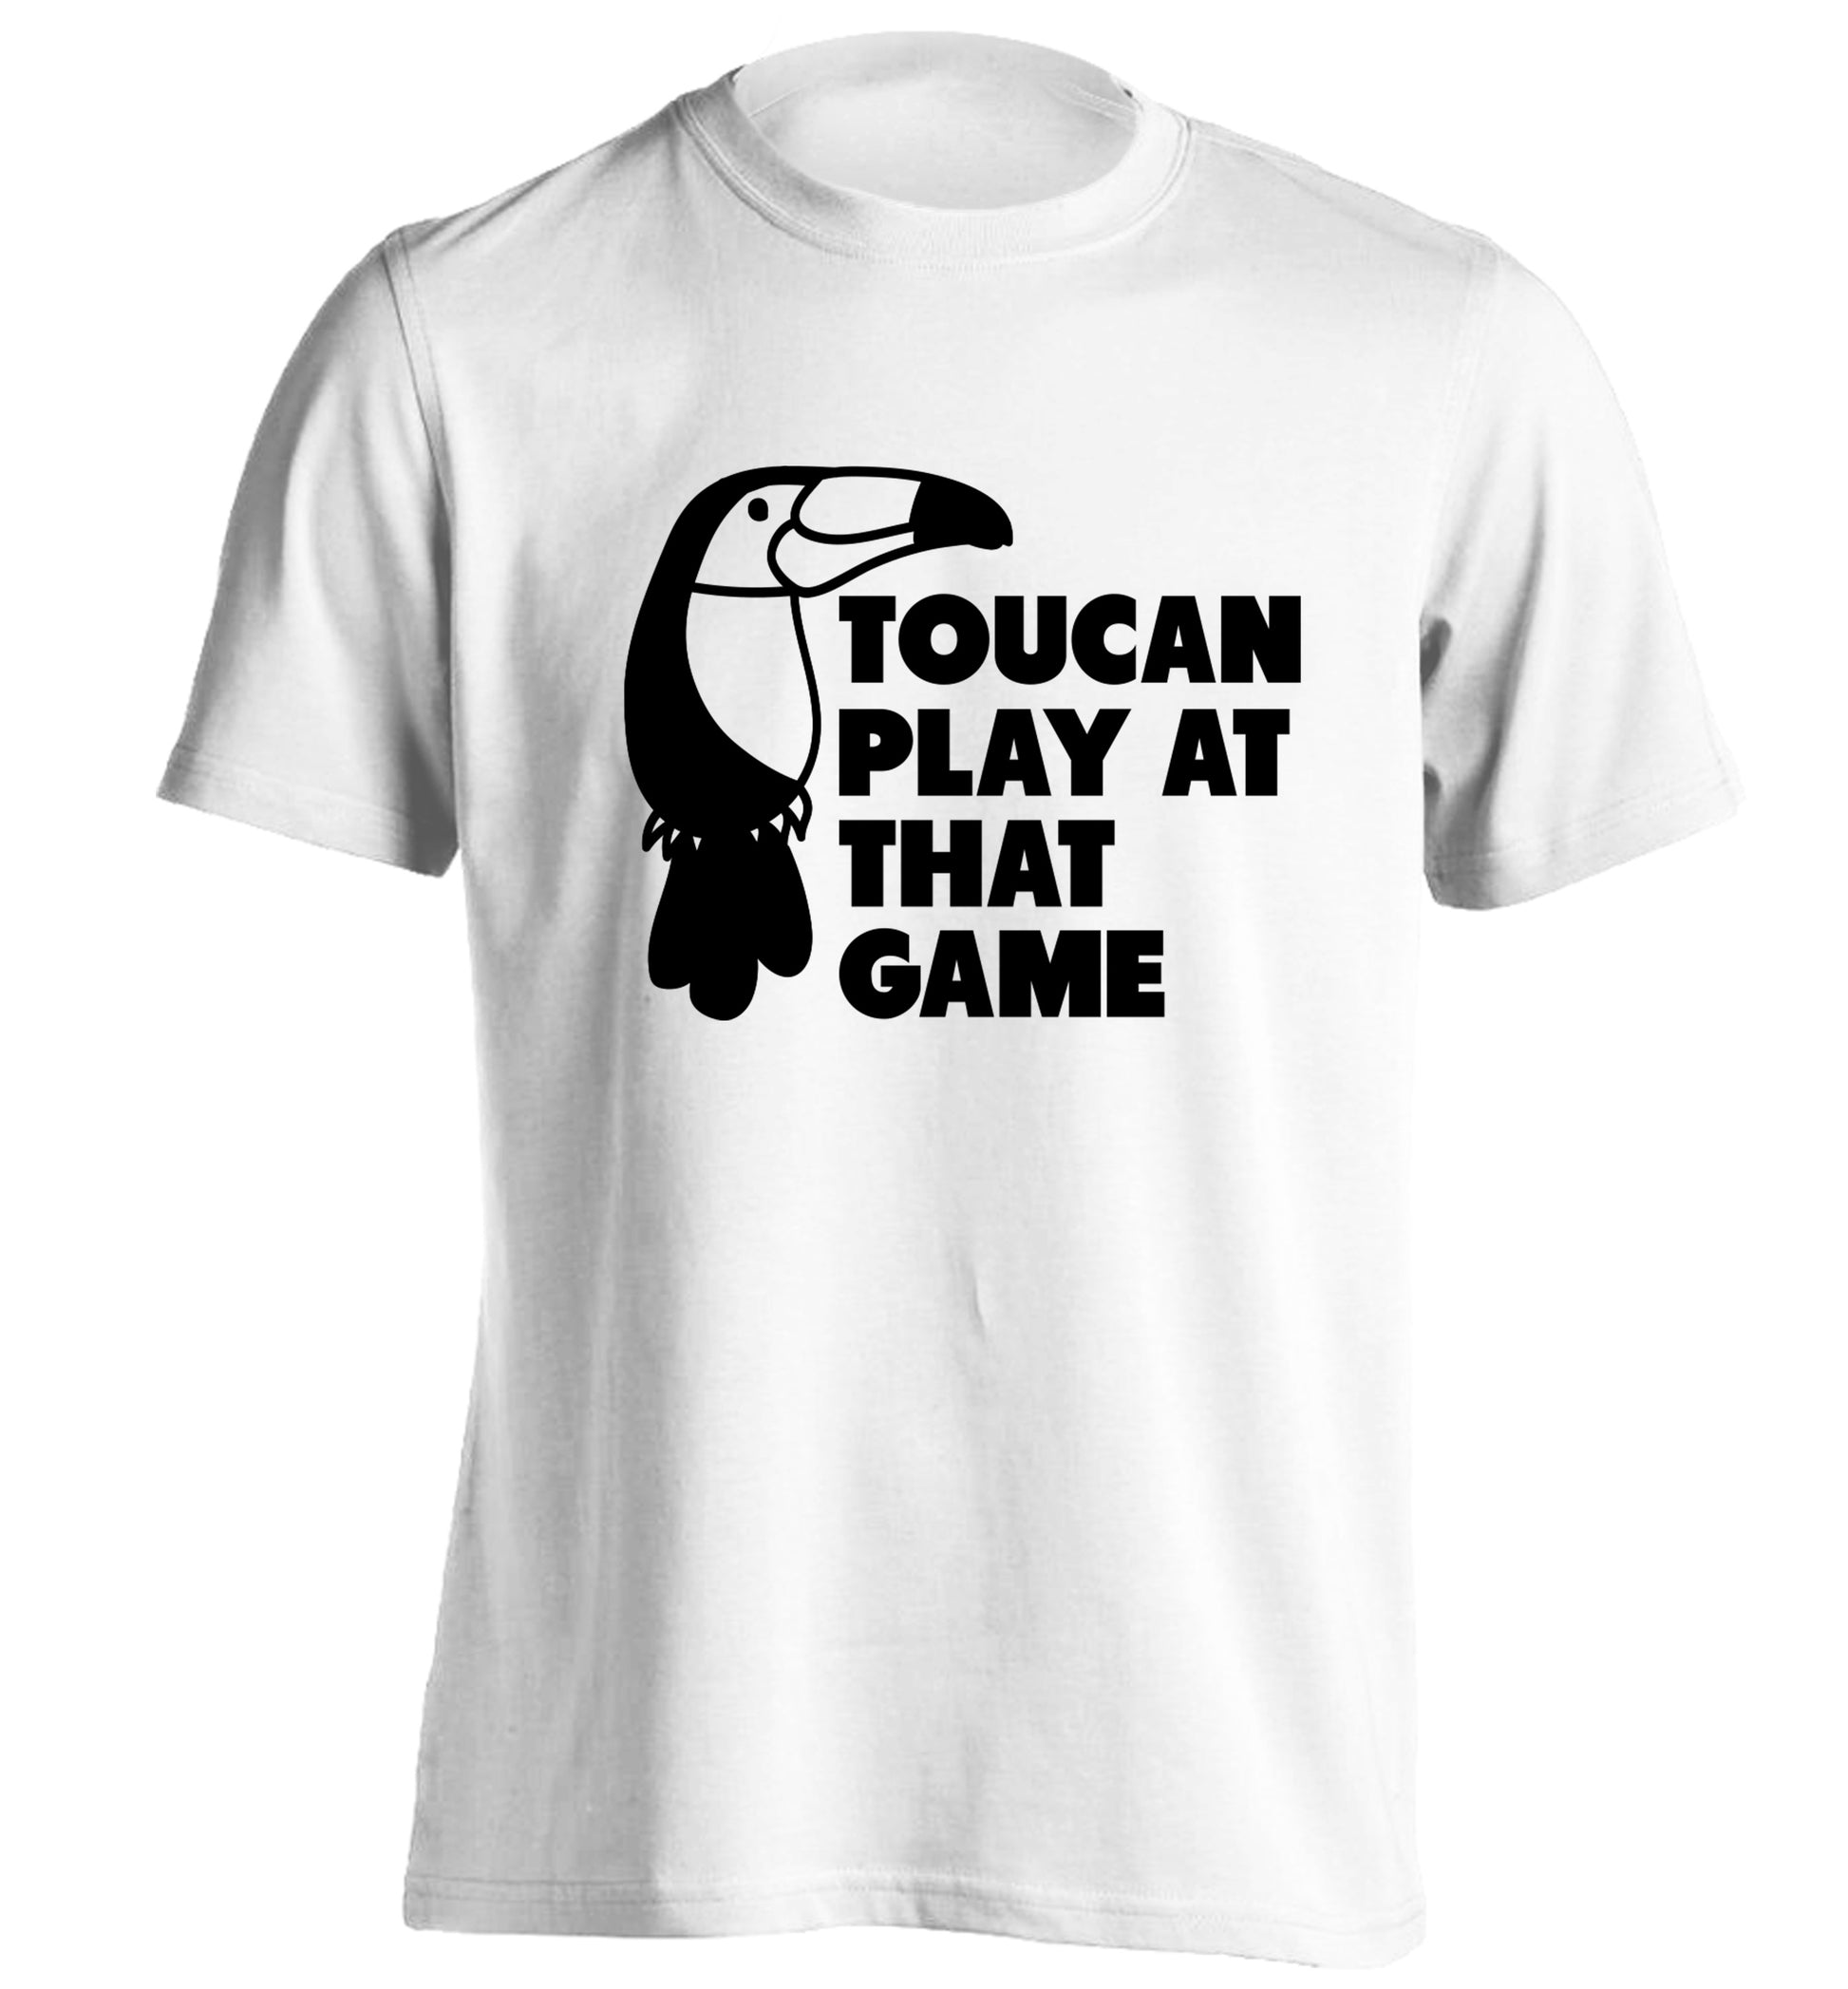 Toucan play at that game adults unisex white Tshirt 2XL